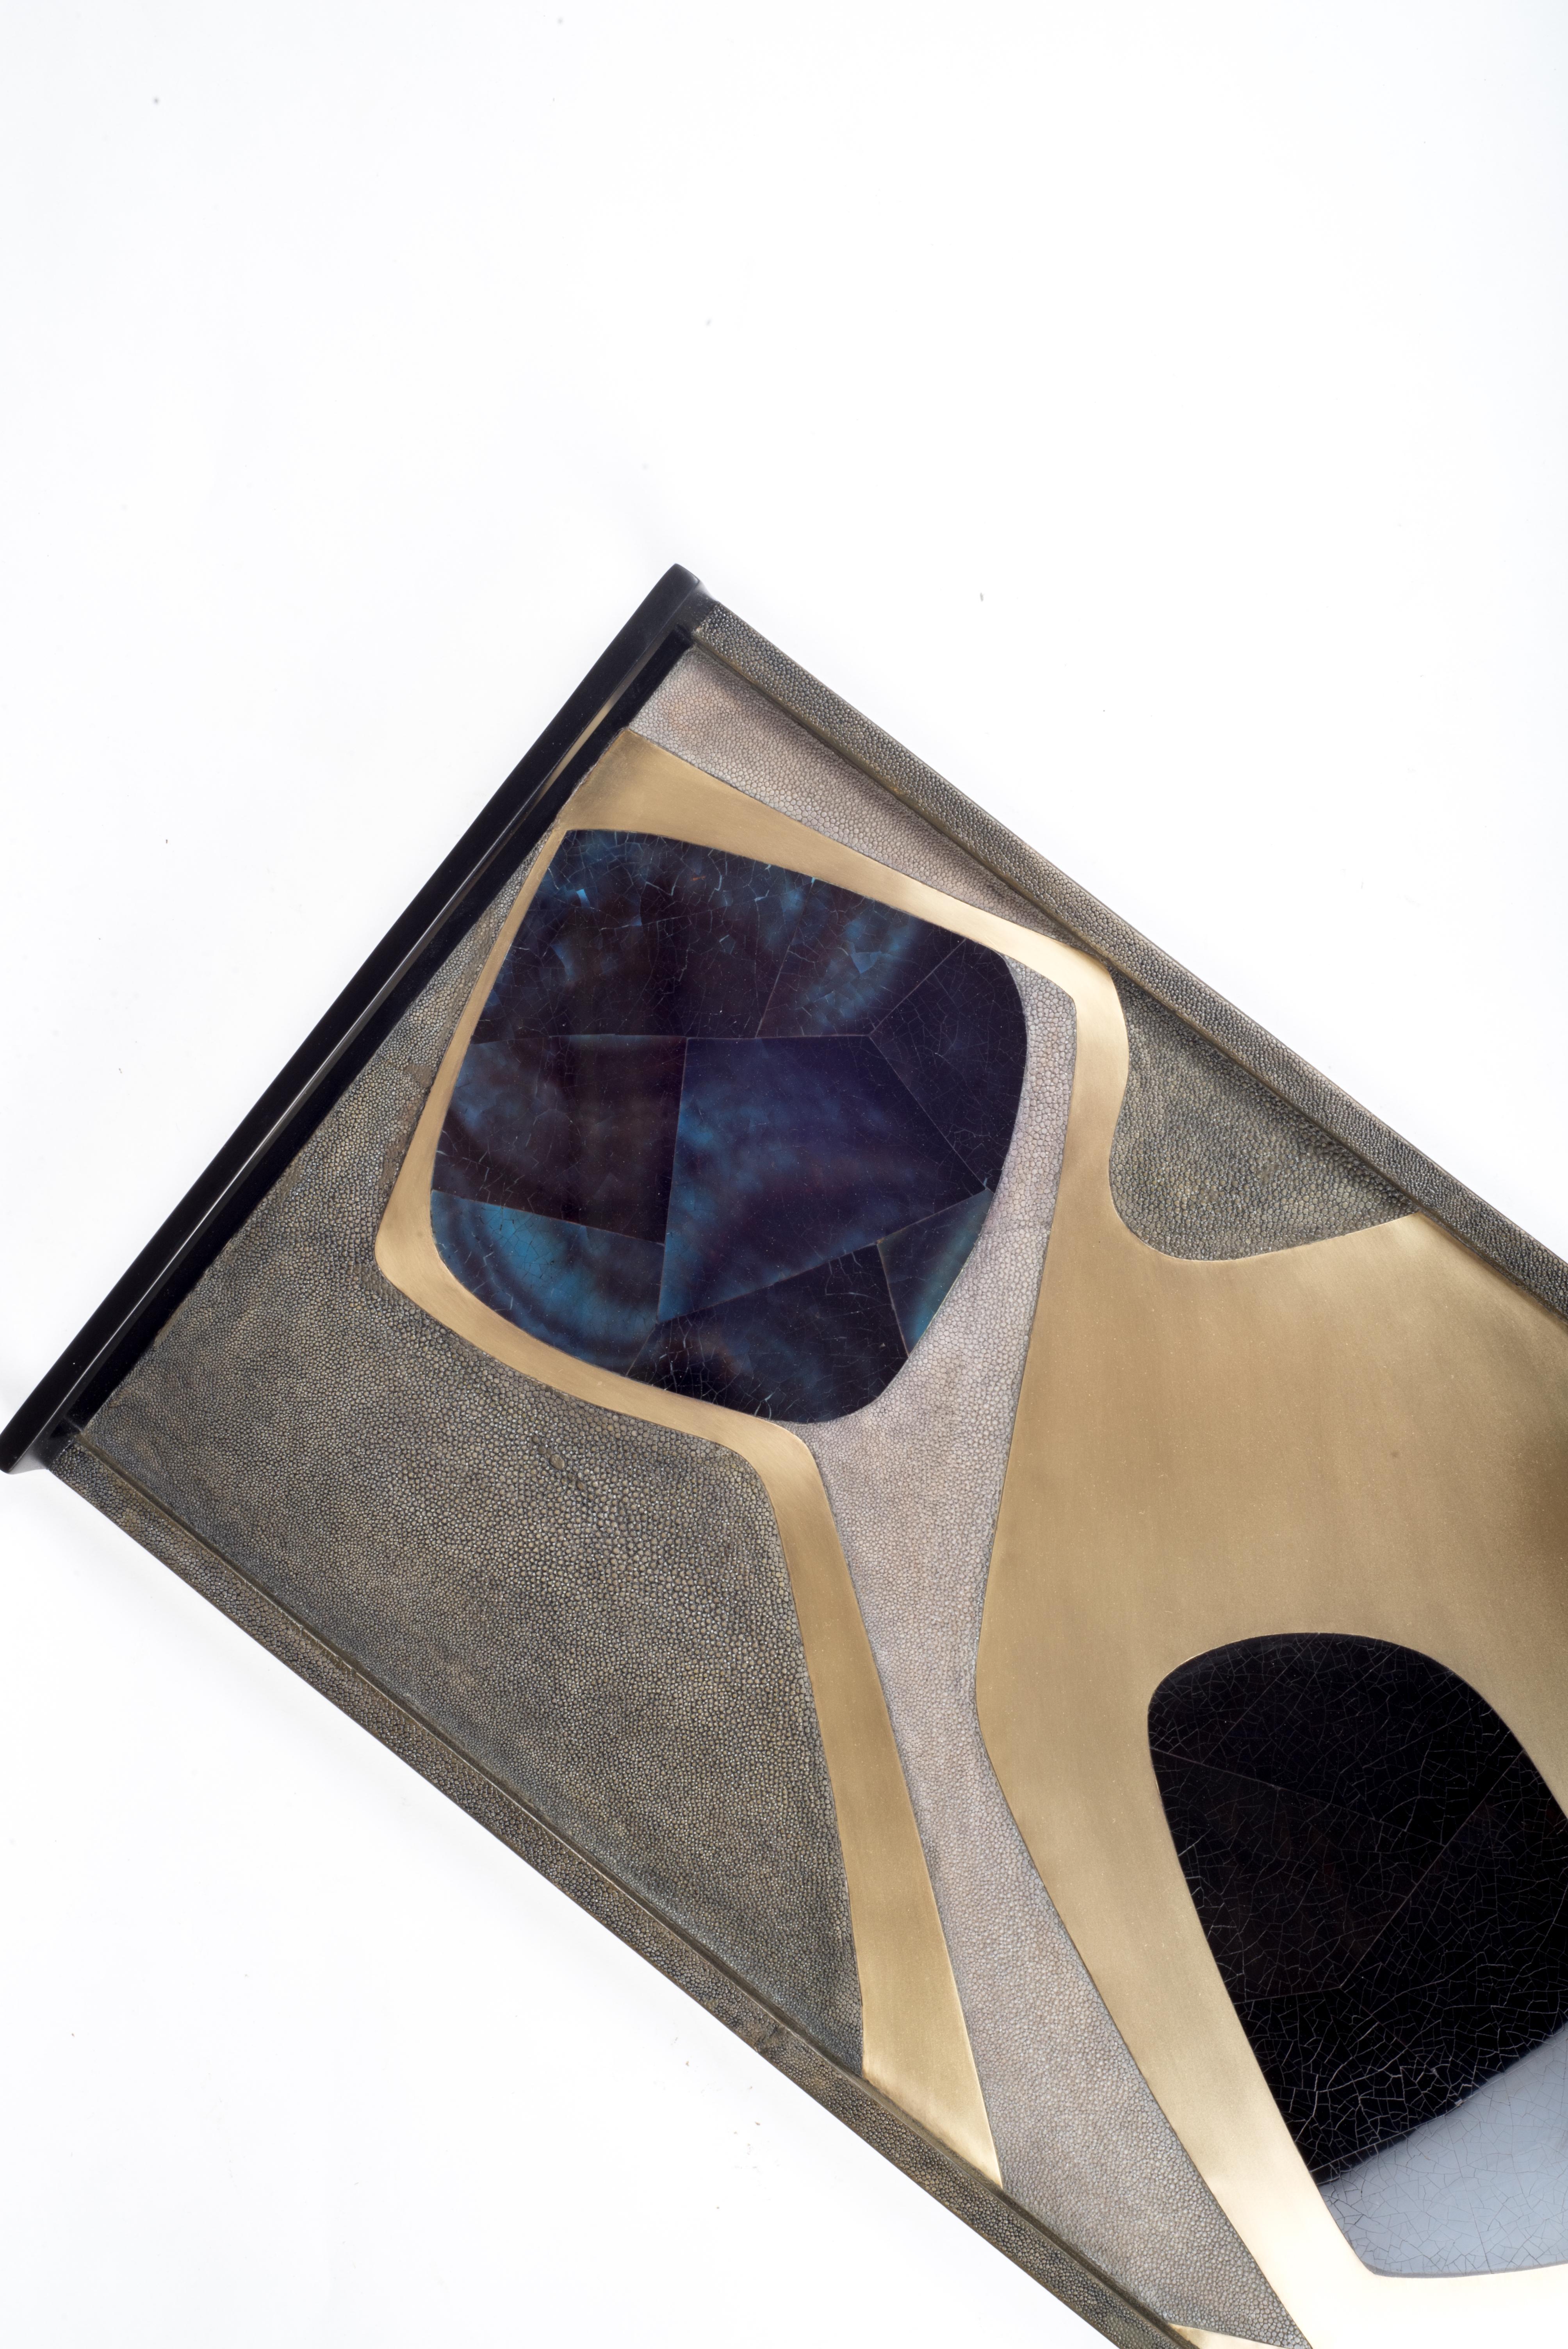 The Cosmos rectangle tray is a stunning tabletop piece for any space. Available in light or dark color way inlaid in a mixture of shagreen, pen shell and bronze-patina brass. Also available on a circular tray.

Measures: 24 x 13.5 x 2